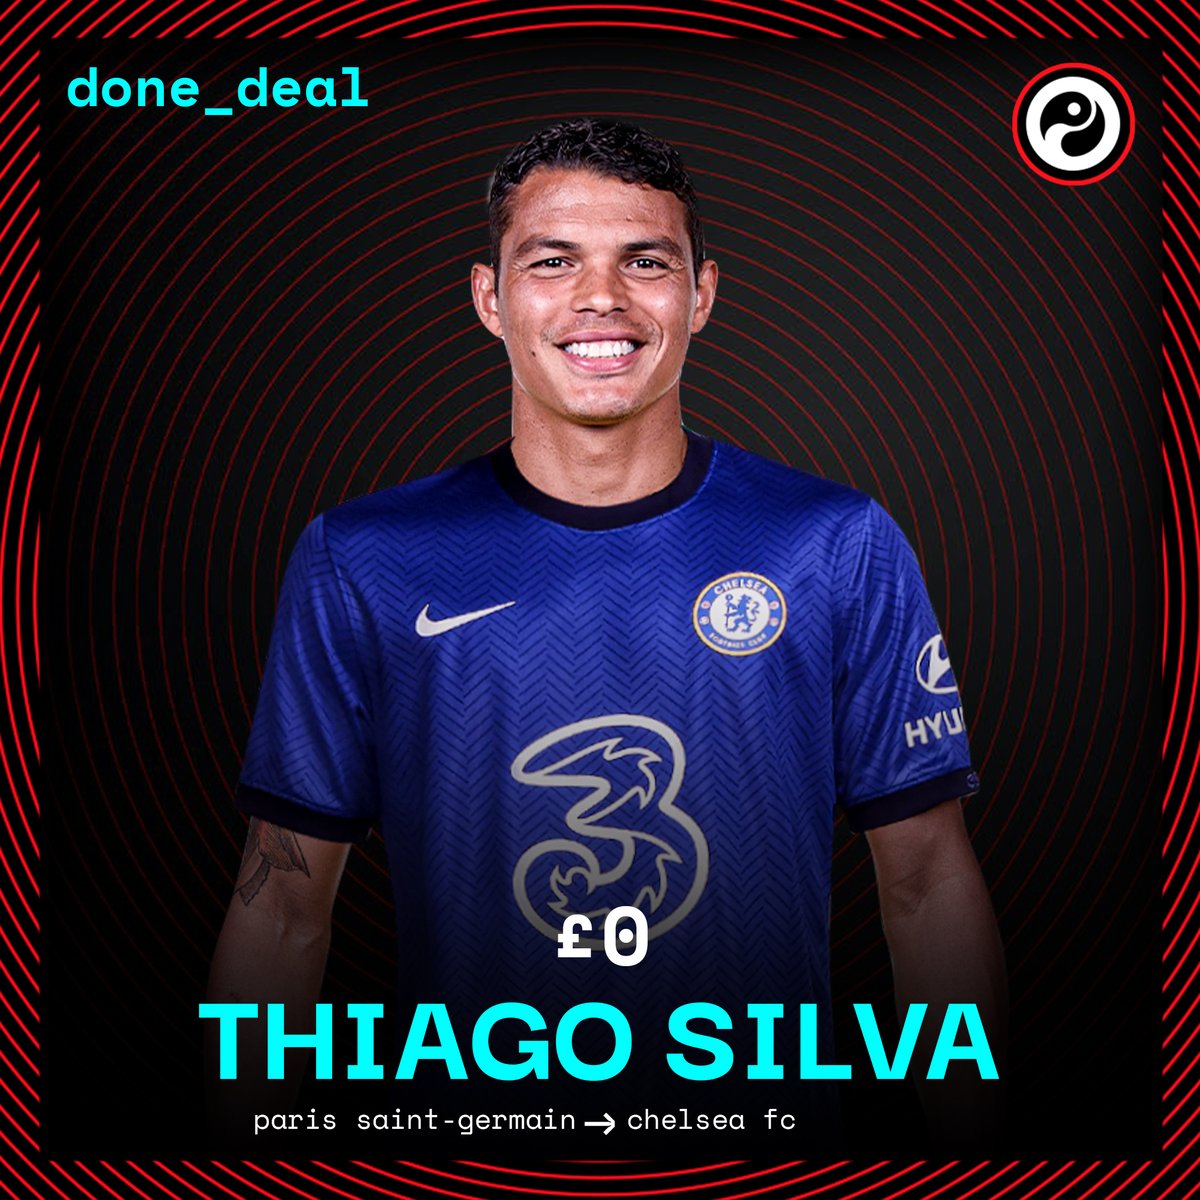 Squawka News On Twitter Done Deal Chelsea Have Confirmed The Signing Of Thiago Silva On A Free Transfer From Psg He Will Sign On A One Year Contract With The Club Having The